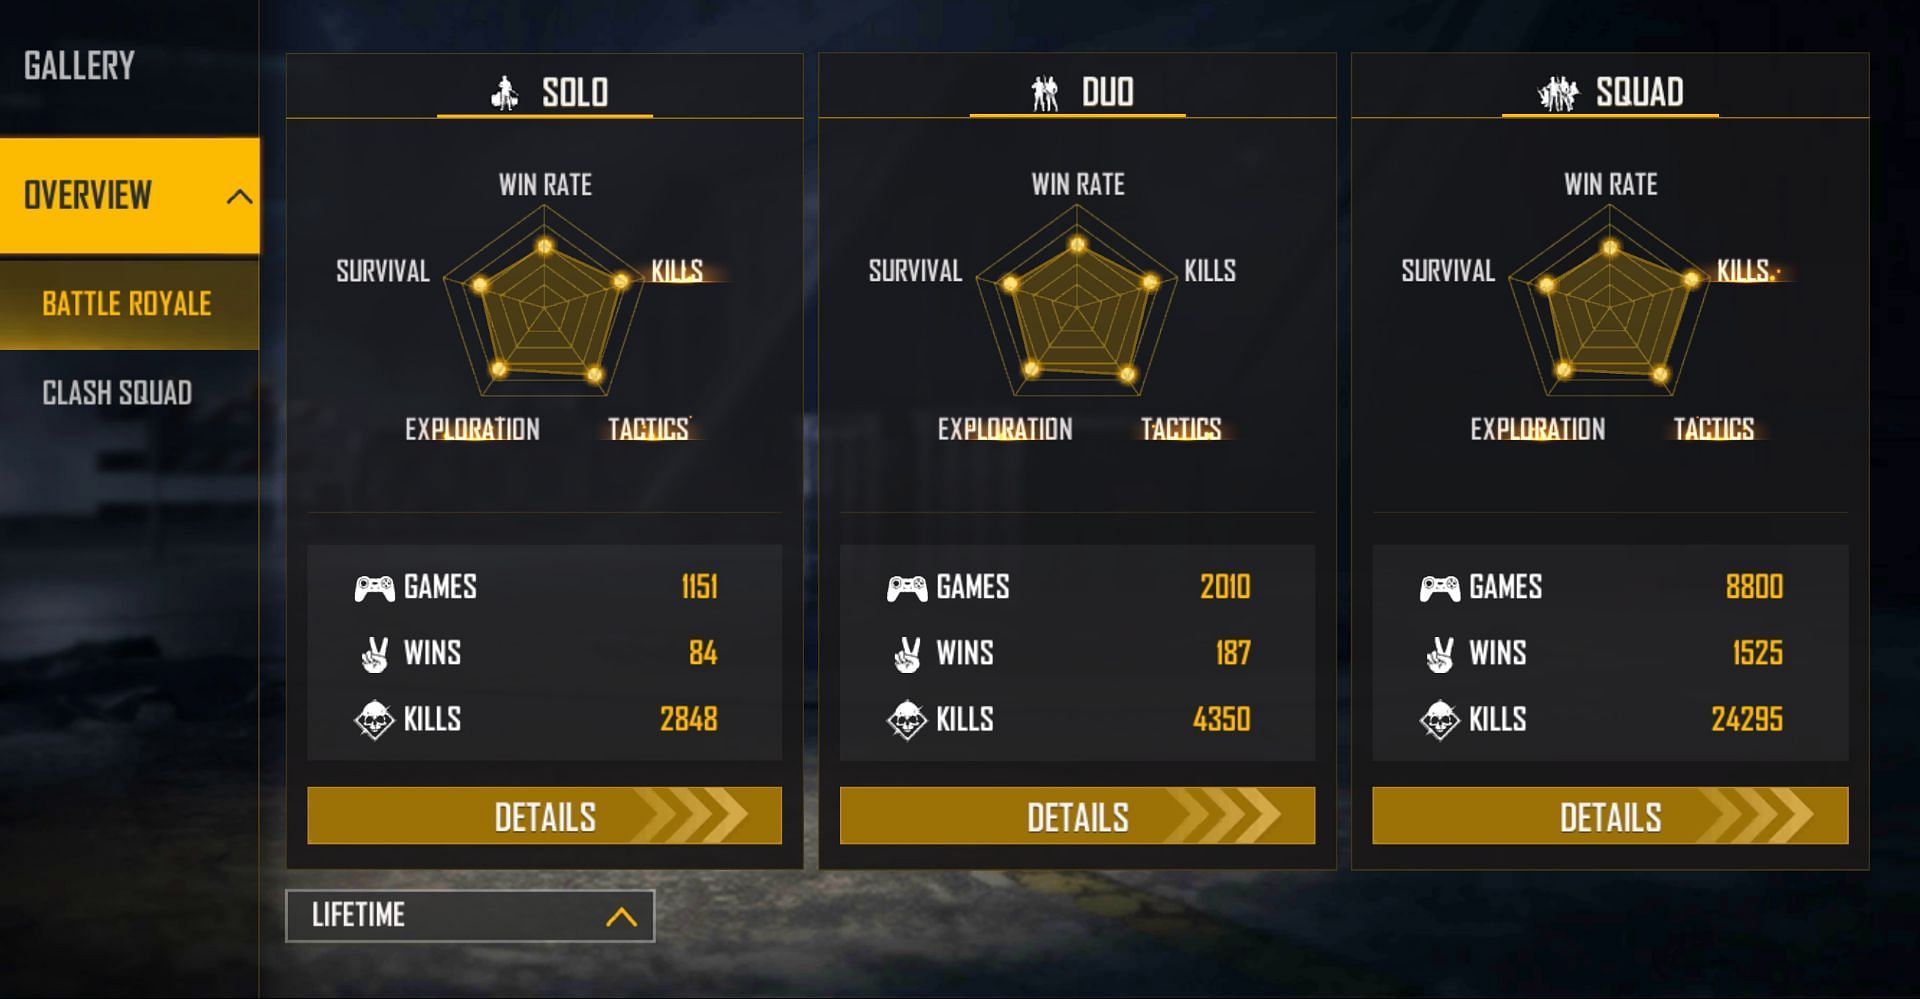 Badge 99 has over 24k frags in the squad matches(Image via Free Fire)